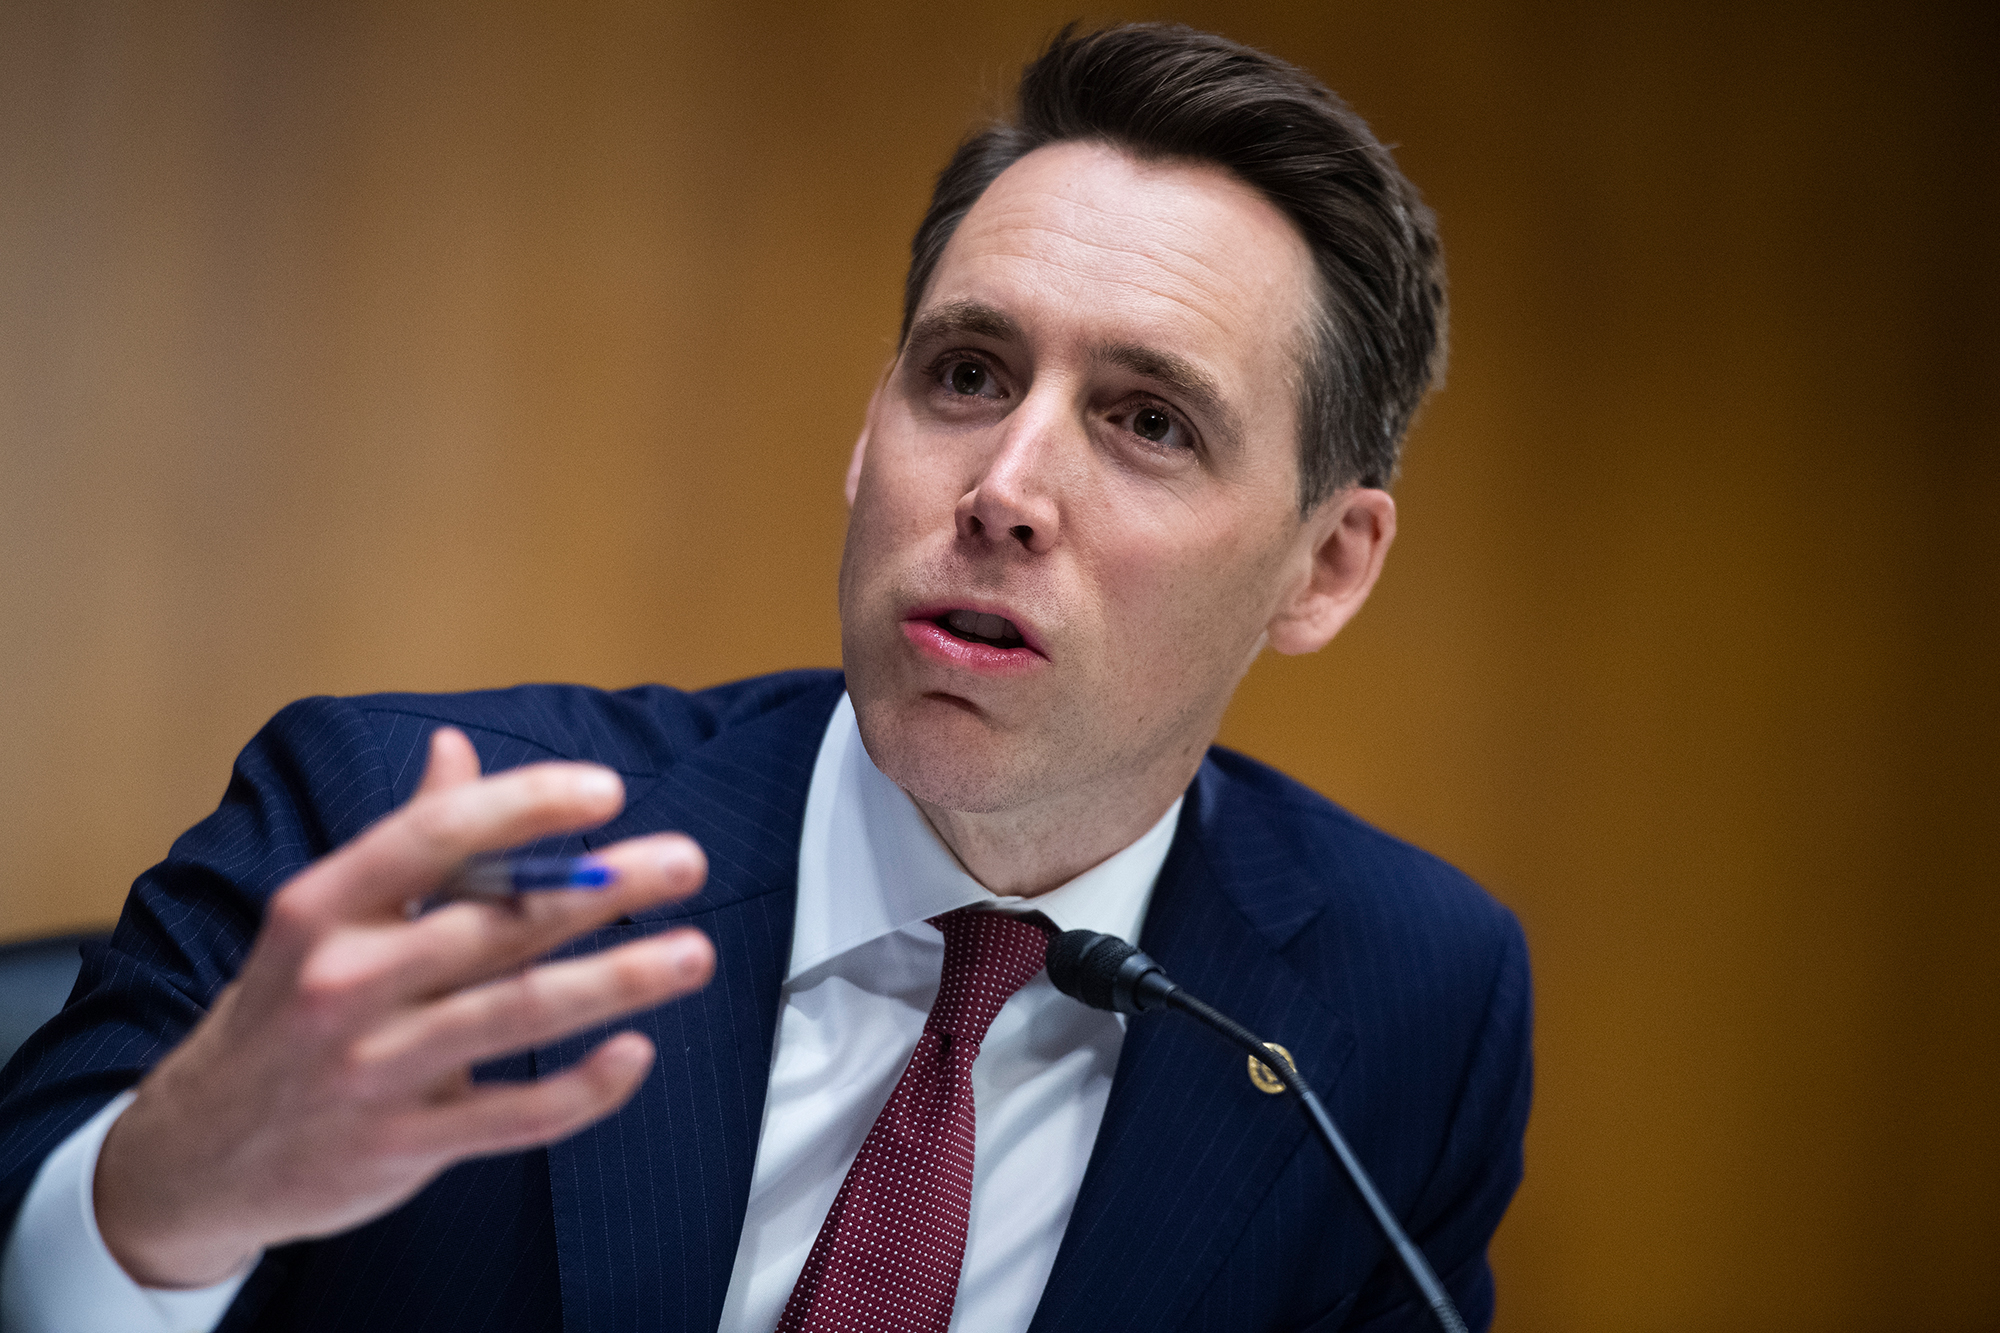 Sen. Josh Hawley (R-MO) asks a question during a Judiciary Committee hearing in the Dirksen Senate Office Building on June 16, 2020 in Washington, D.C.